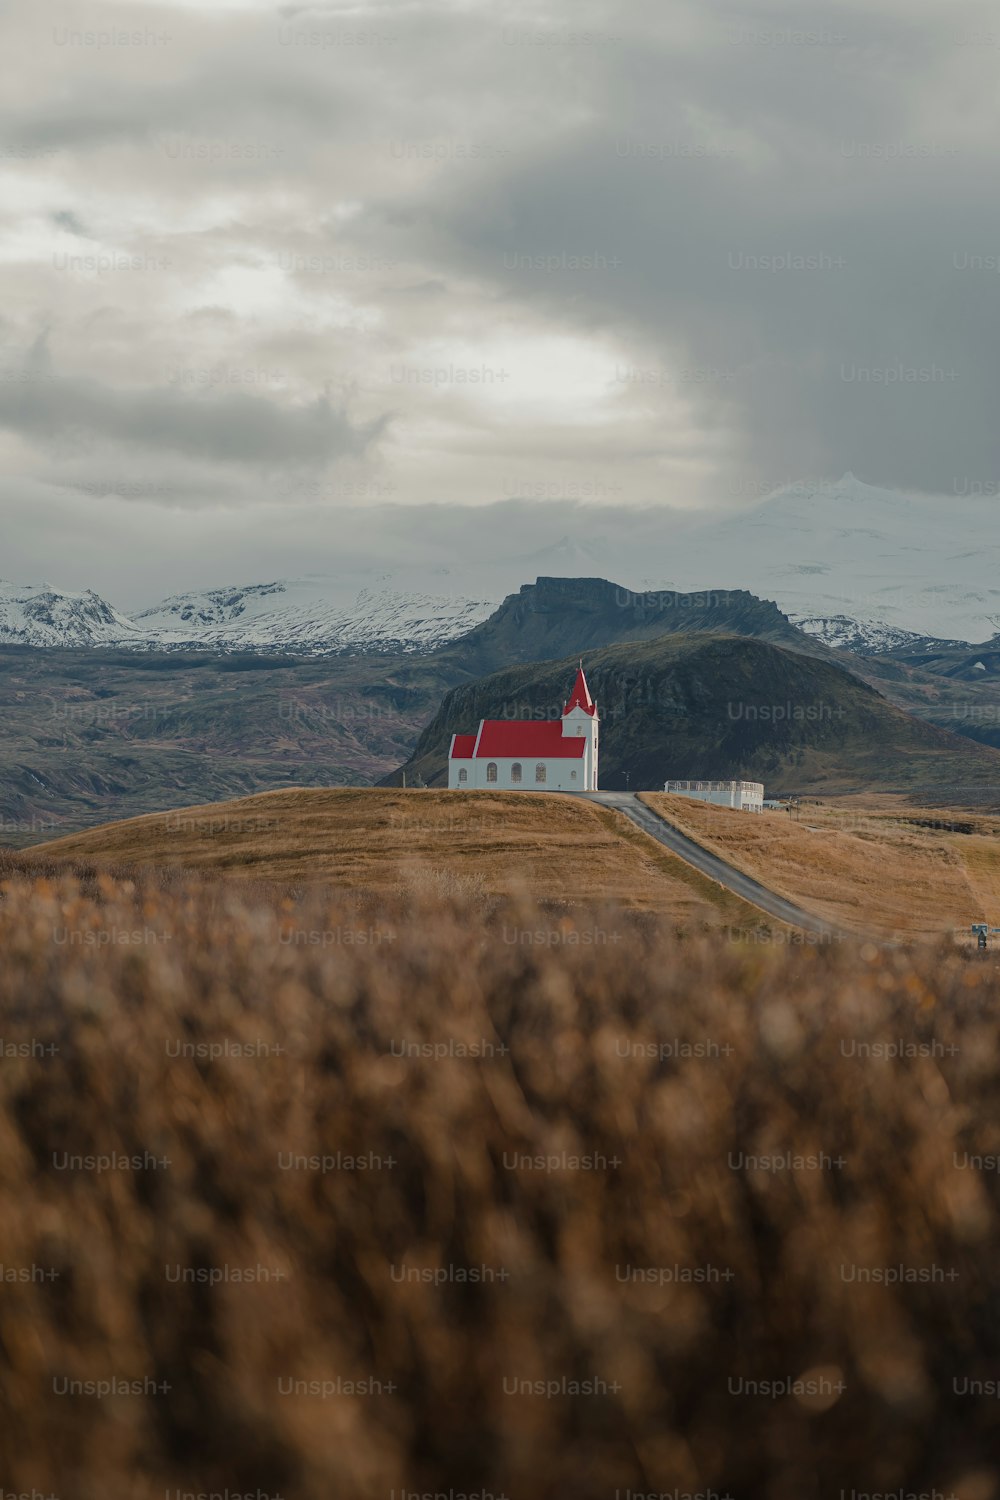 a red and white house on a hill with mountains in the background